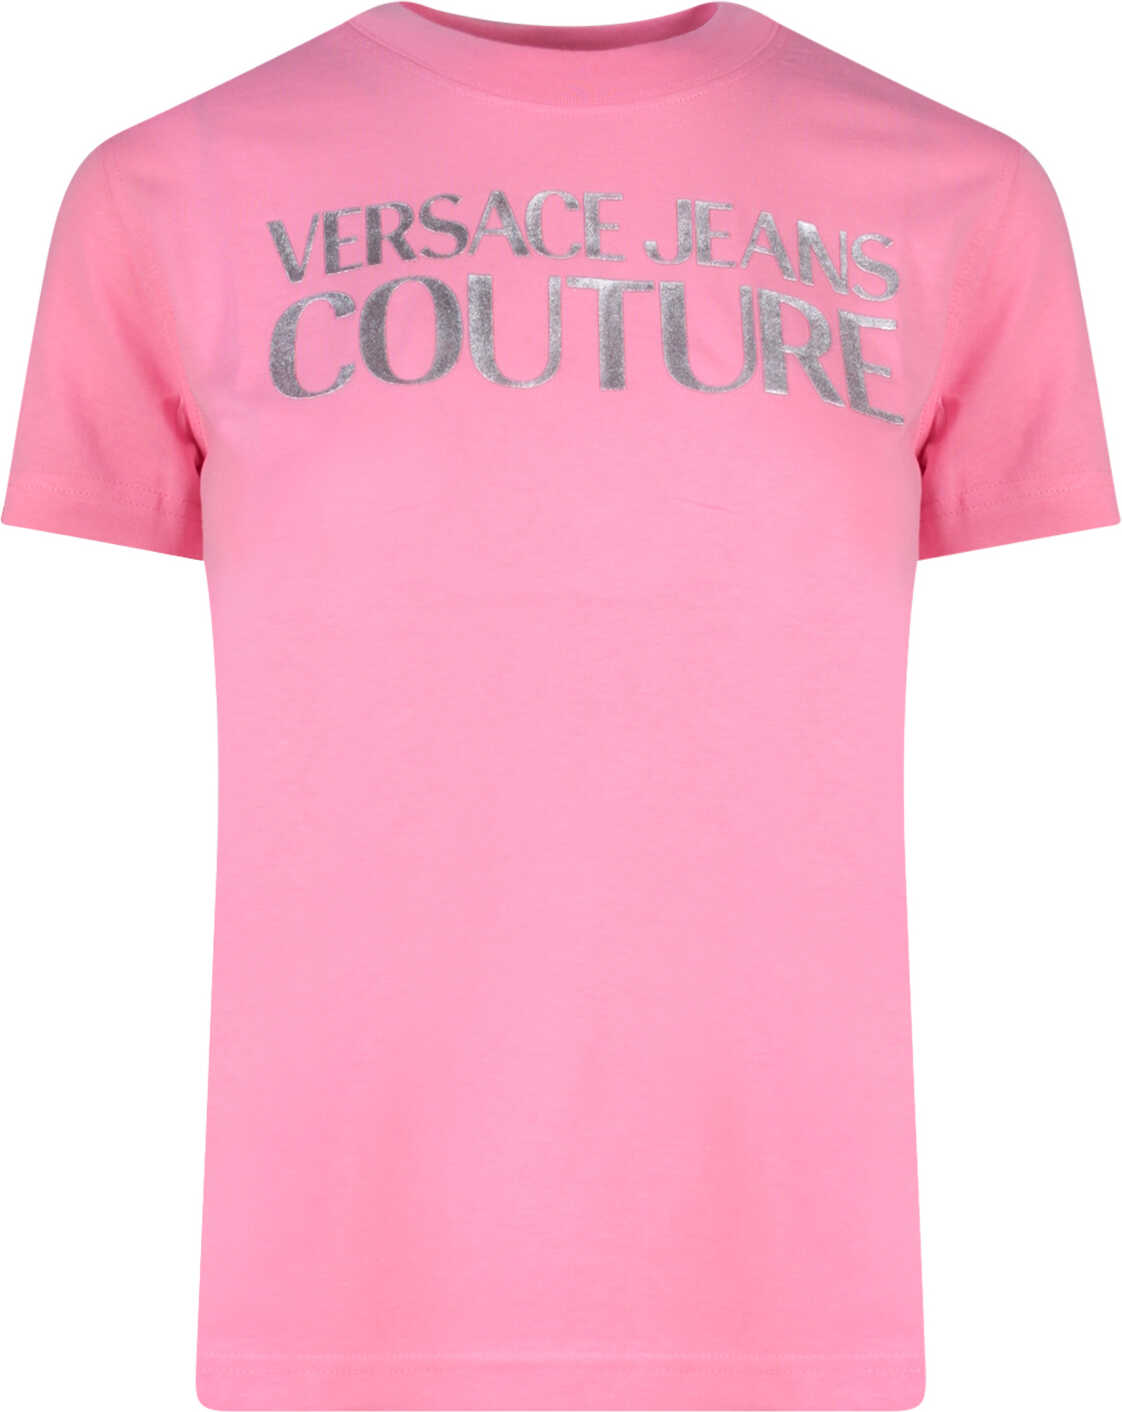 Versace Jeans Couture T-Shirt Pink image